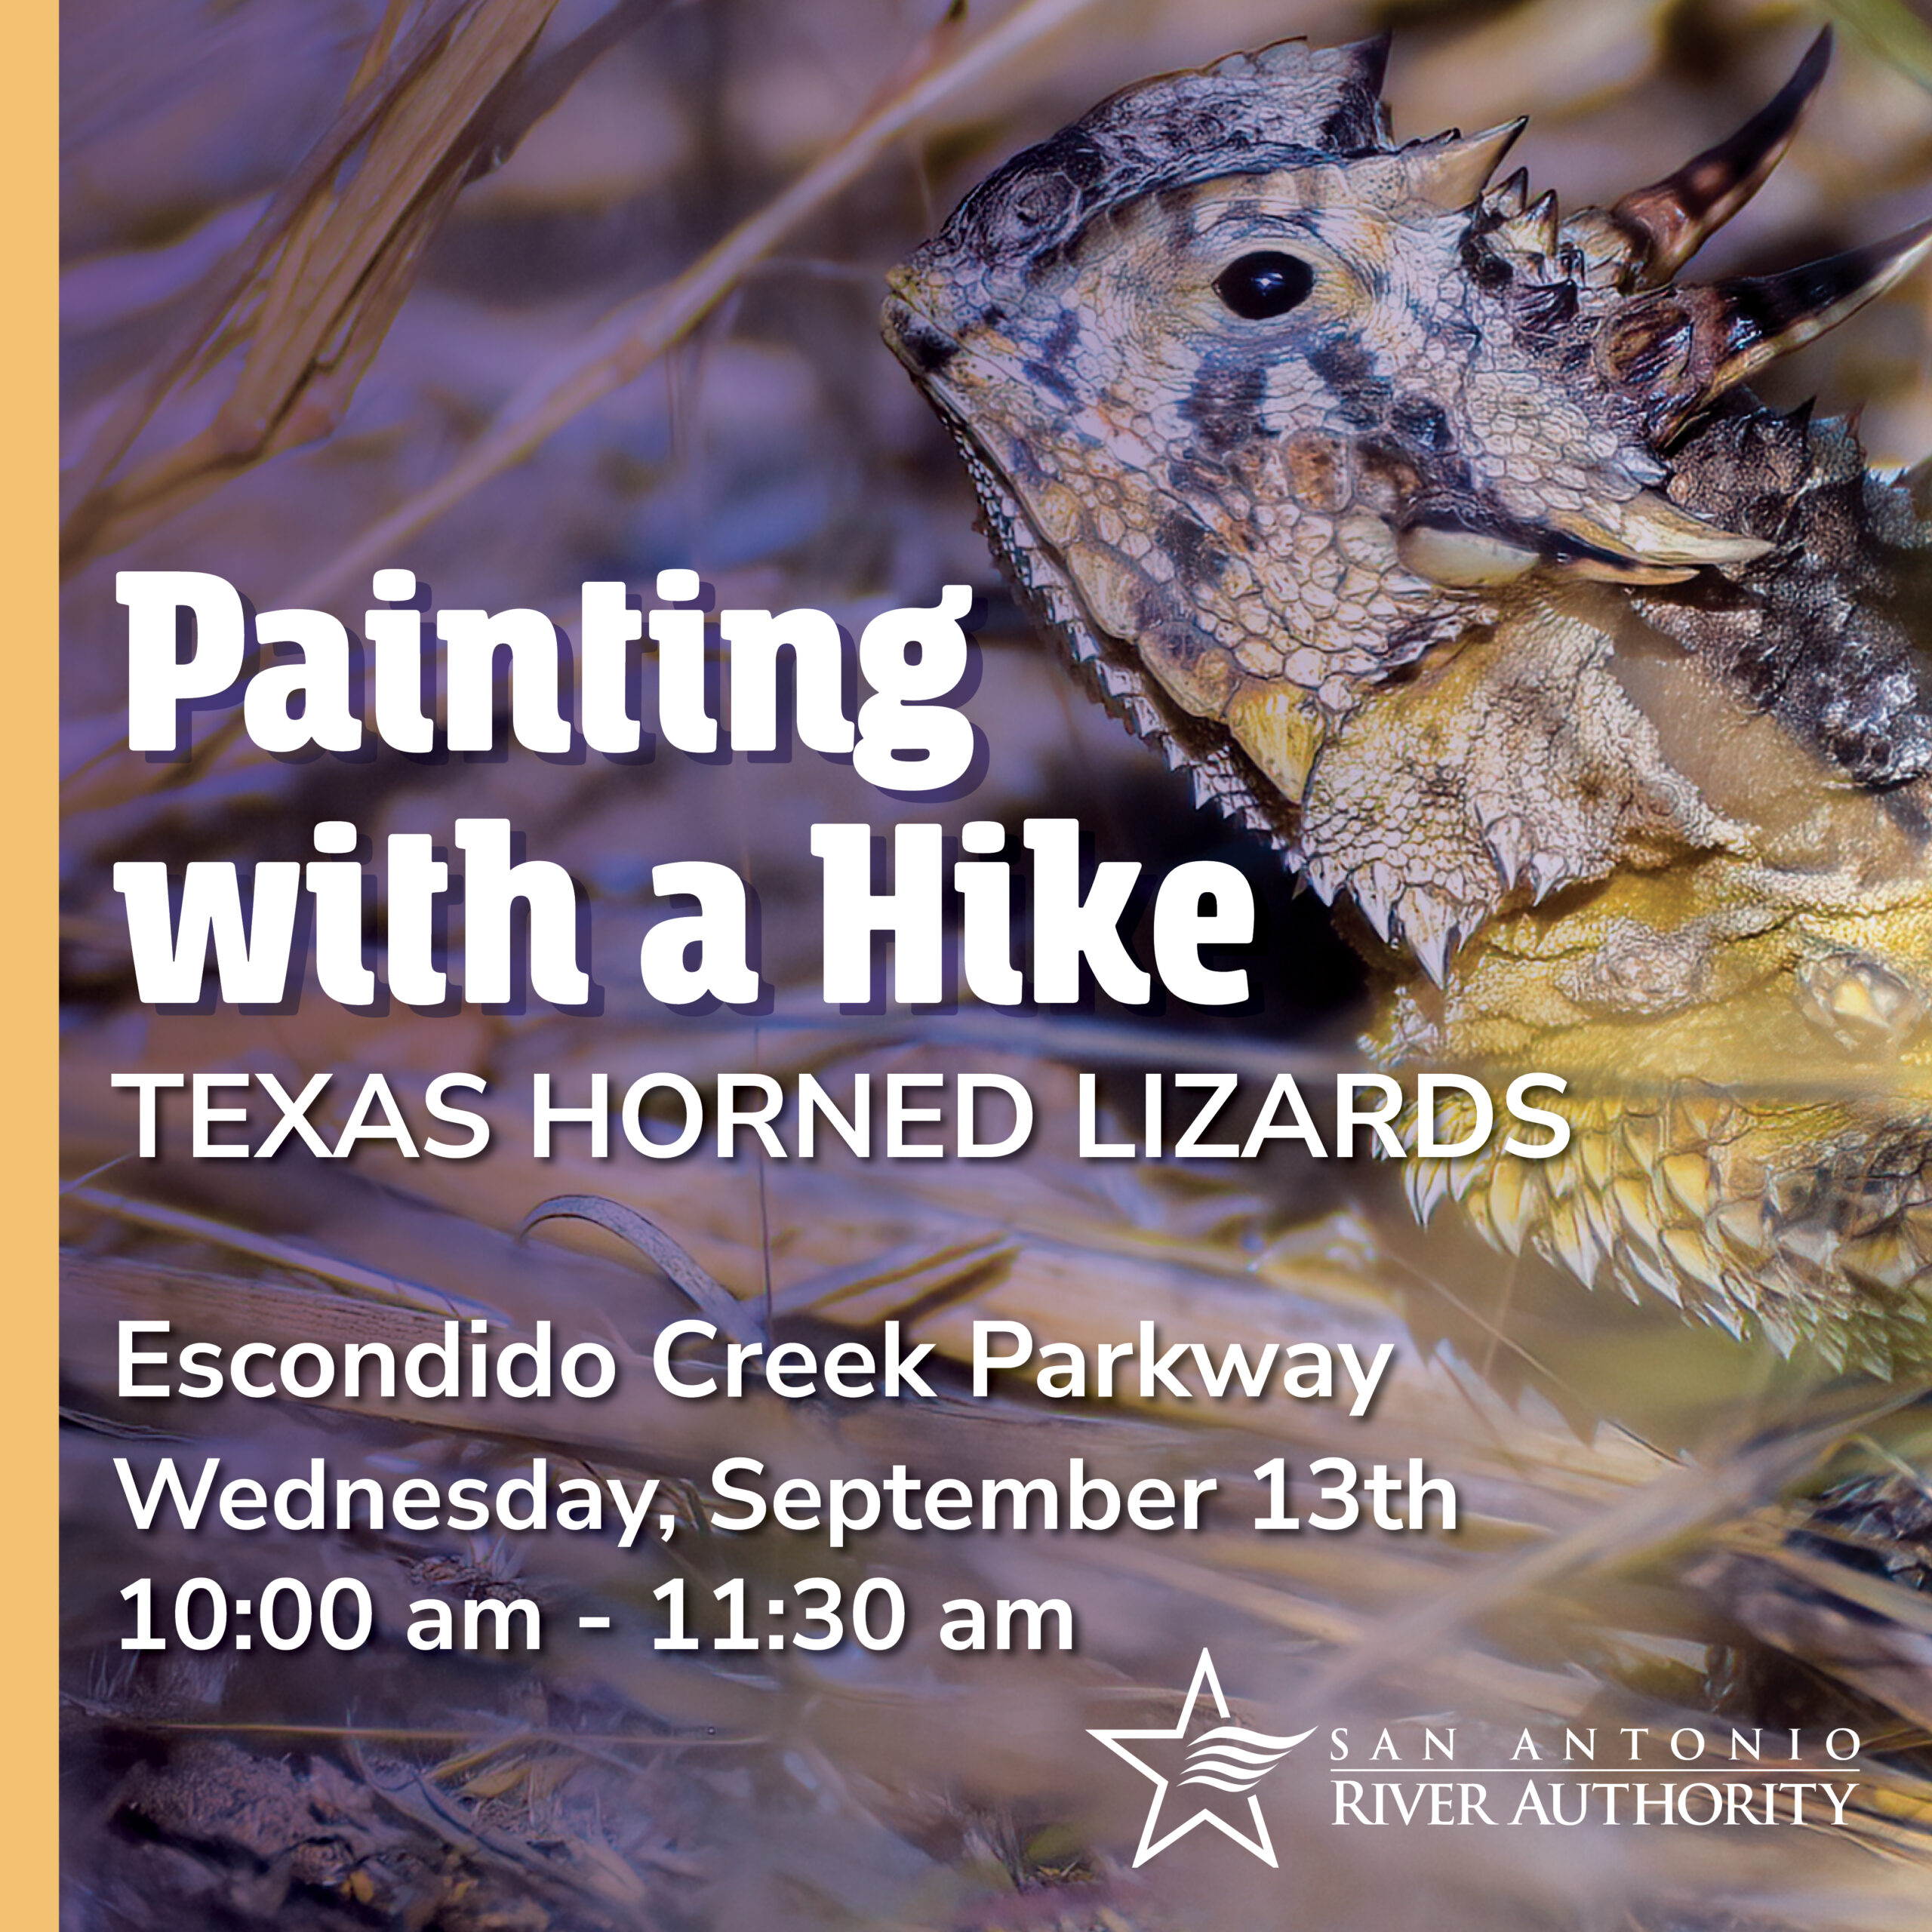 Painting with a Hike Texas Horned Lizards